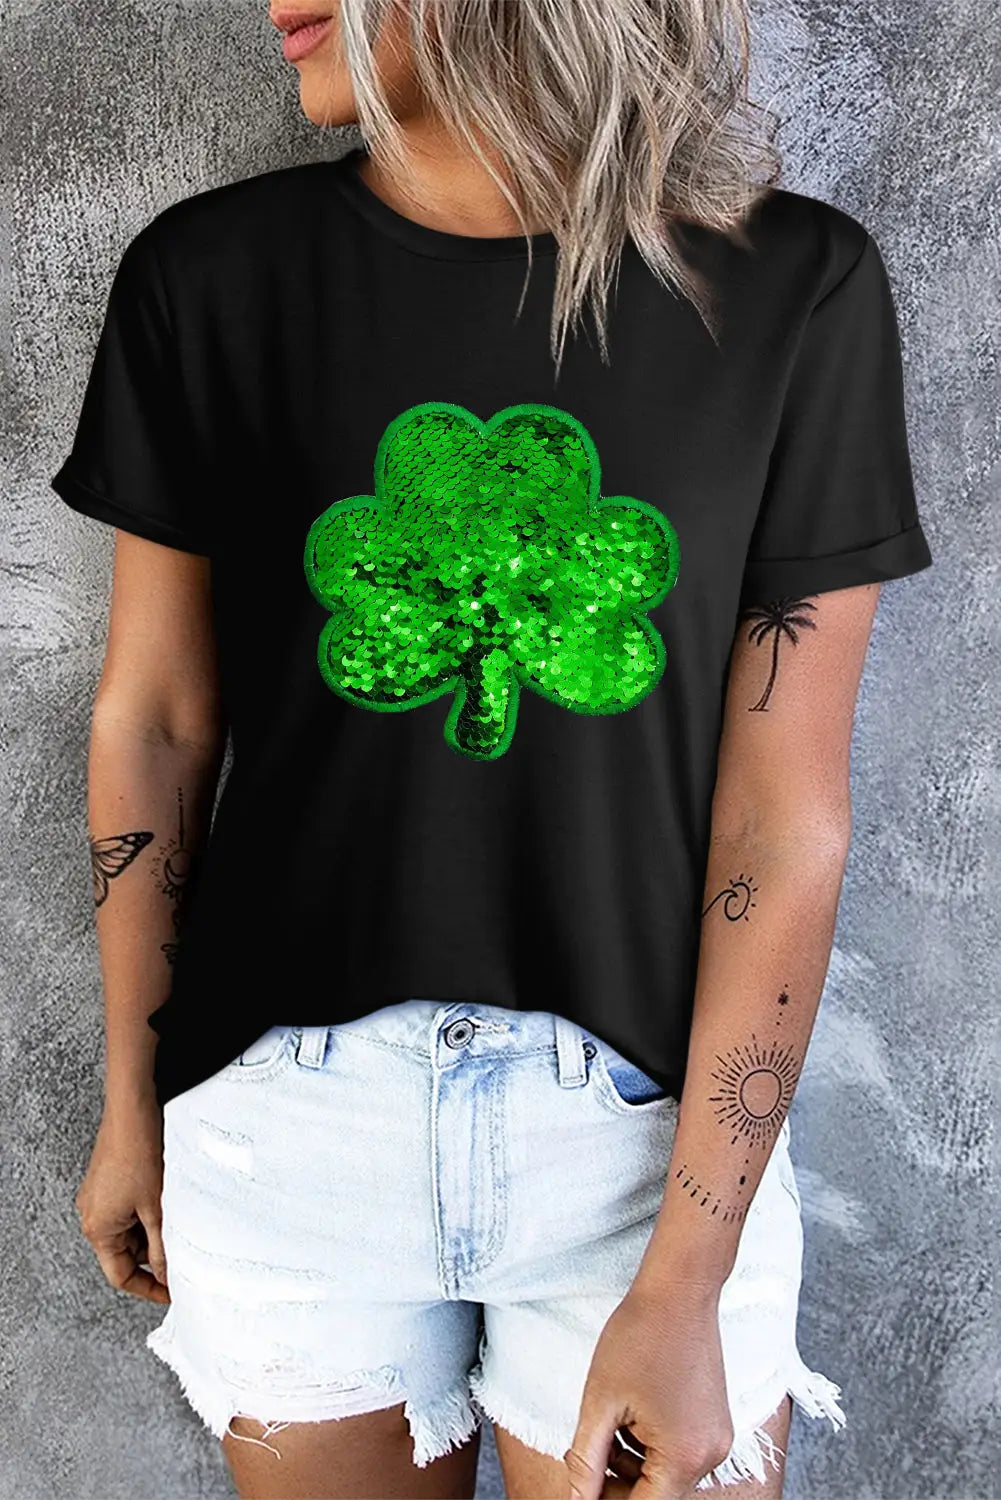 Black sequin clover embroidered round neck graphic tee - s 62% polyester + 32% cotton + 6% elastane t - shirts